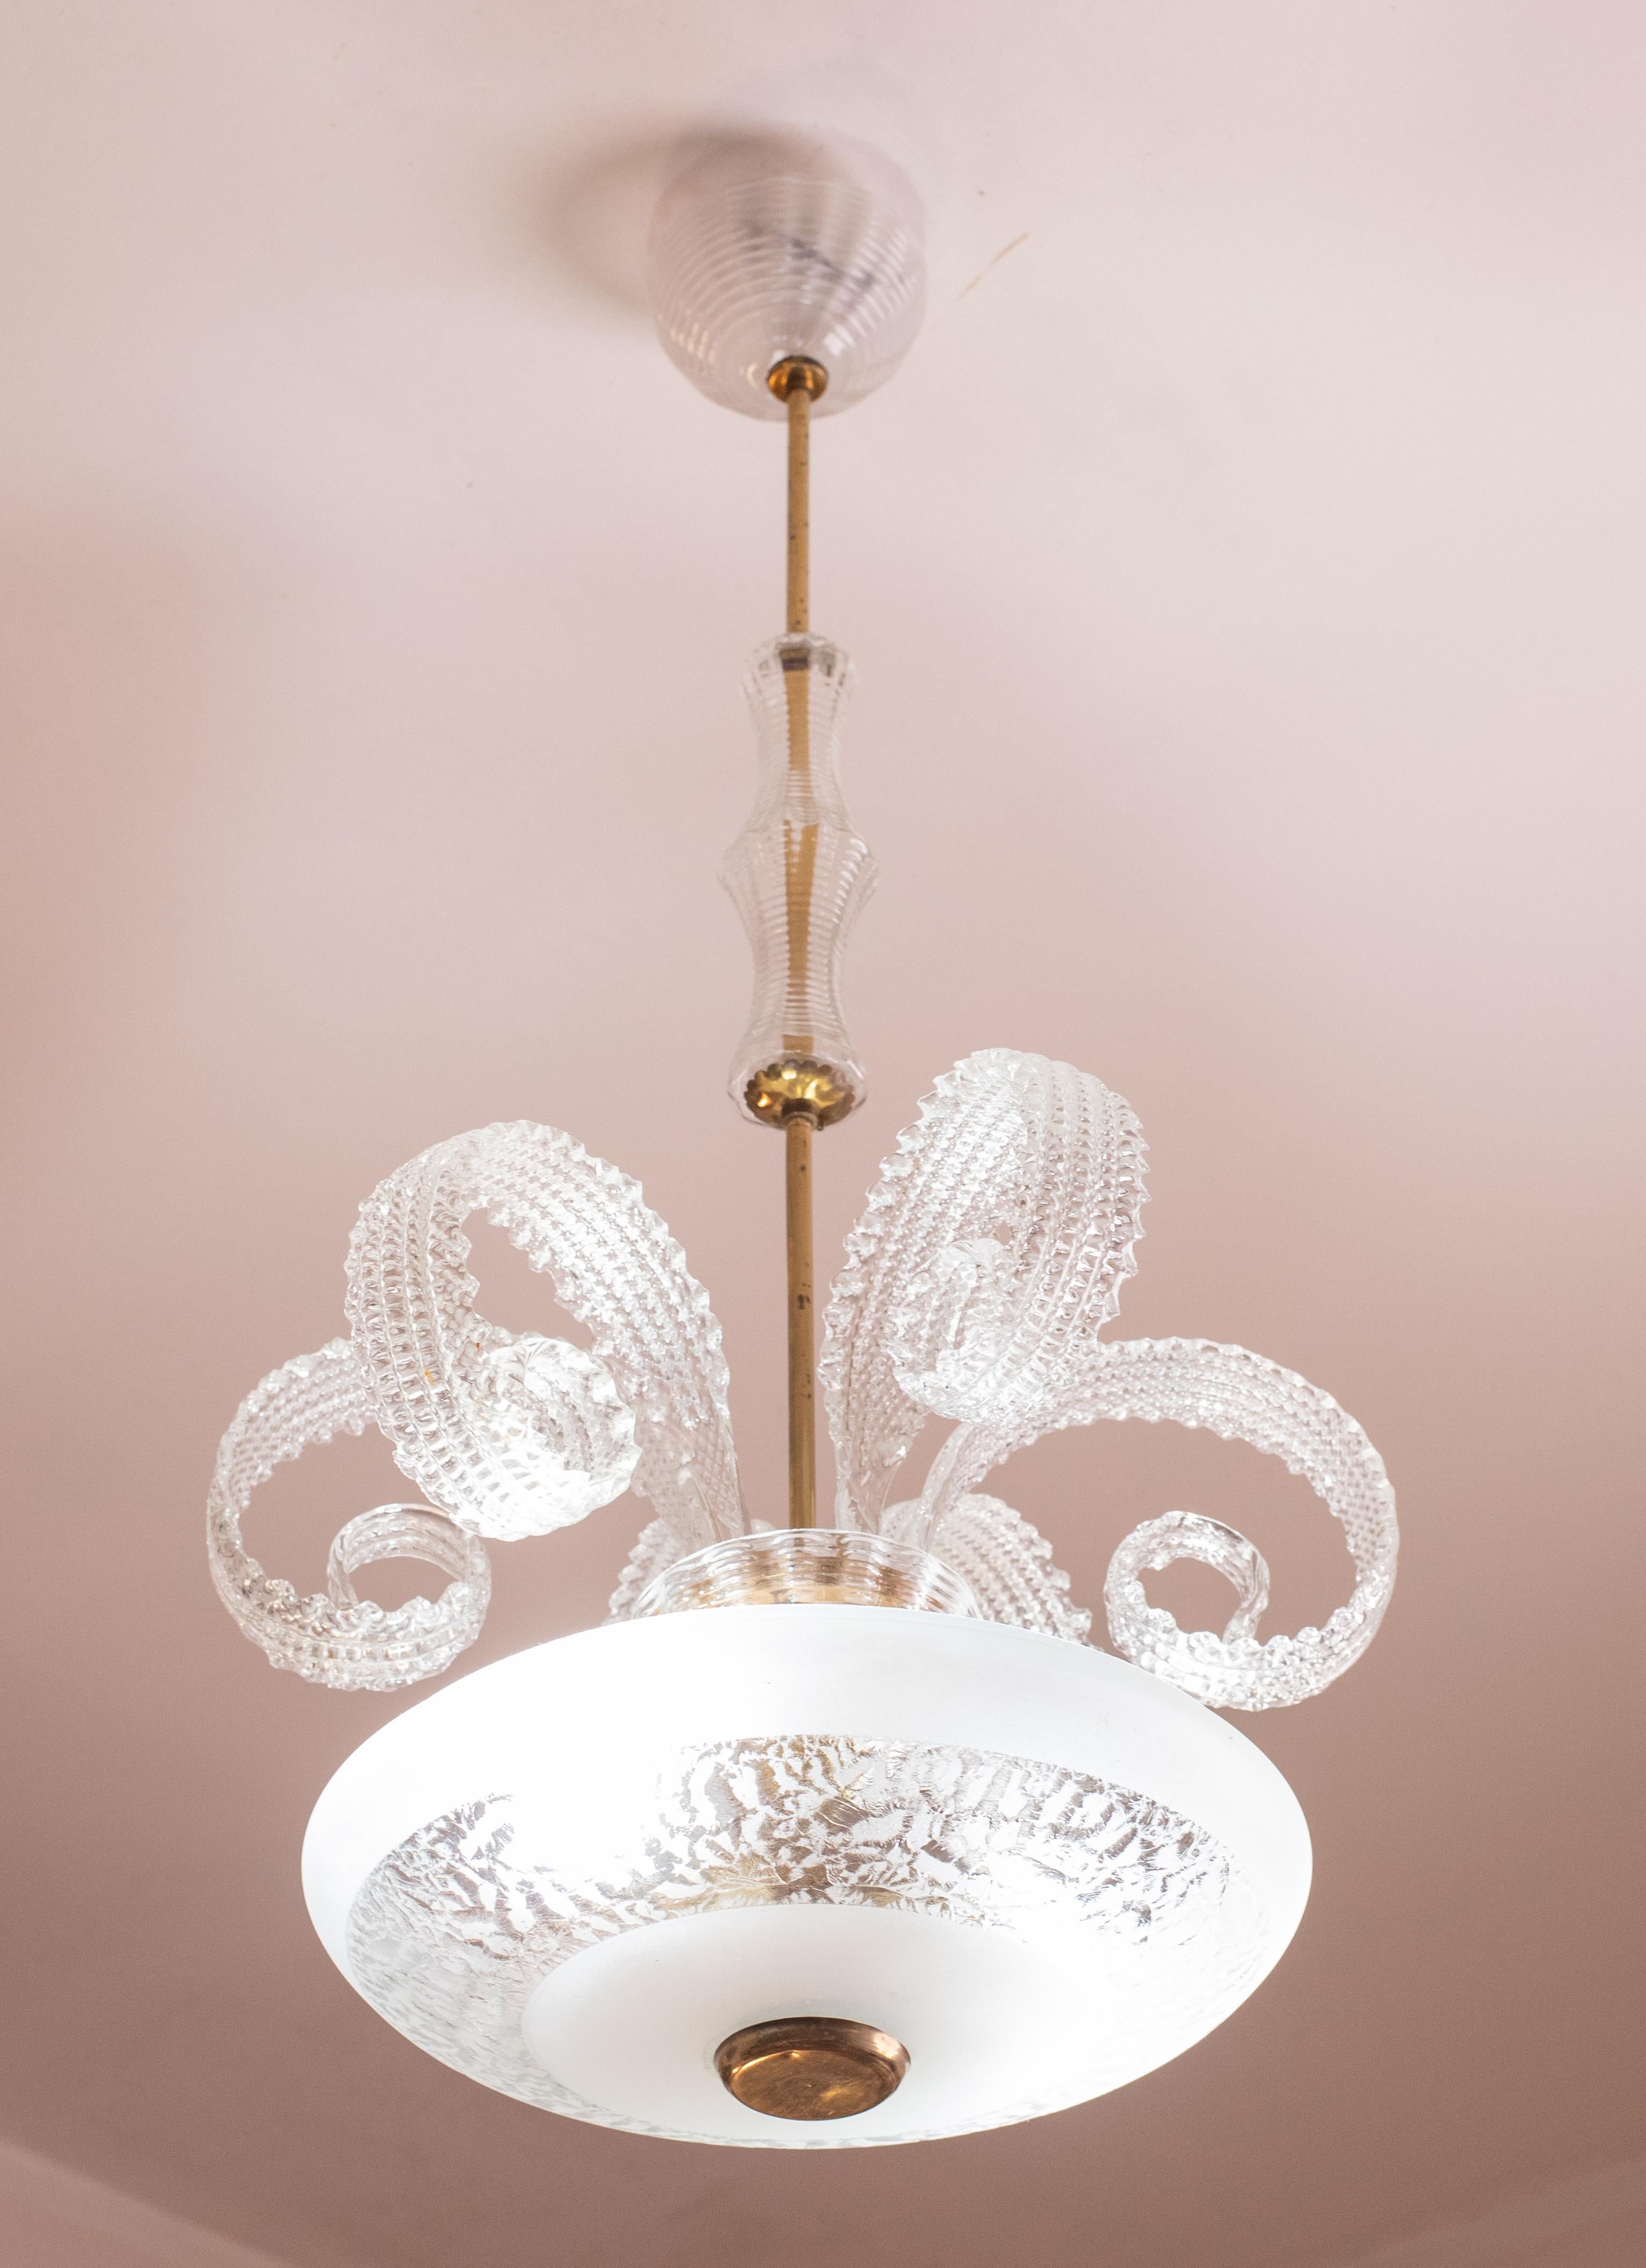 Elegant Art Decò chandelier by Barovier & Toso, Murano glass, 1940s.

Six leaves in beautiful transparent glass.

All the glass are in perfect condition, some sign of the time in the structure.

The chandelier is 90 cm high, 40 cm wide.

The